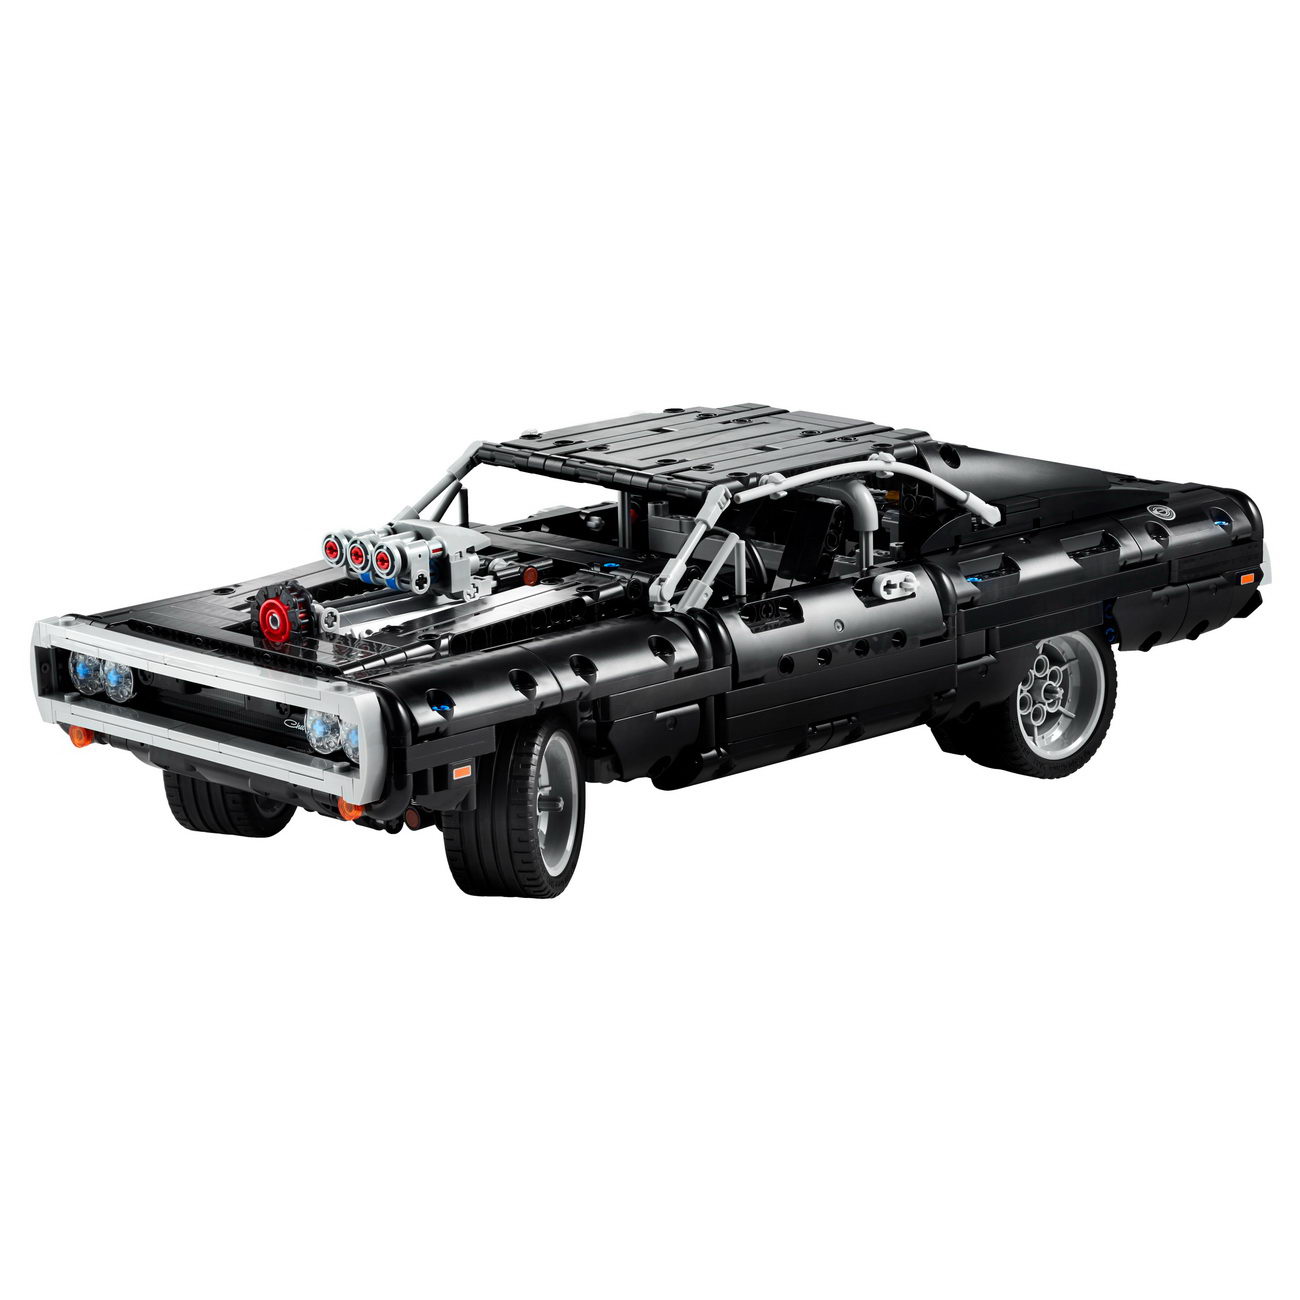 LEGO Technic - Doms Dodge Charger (42111)